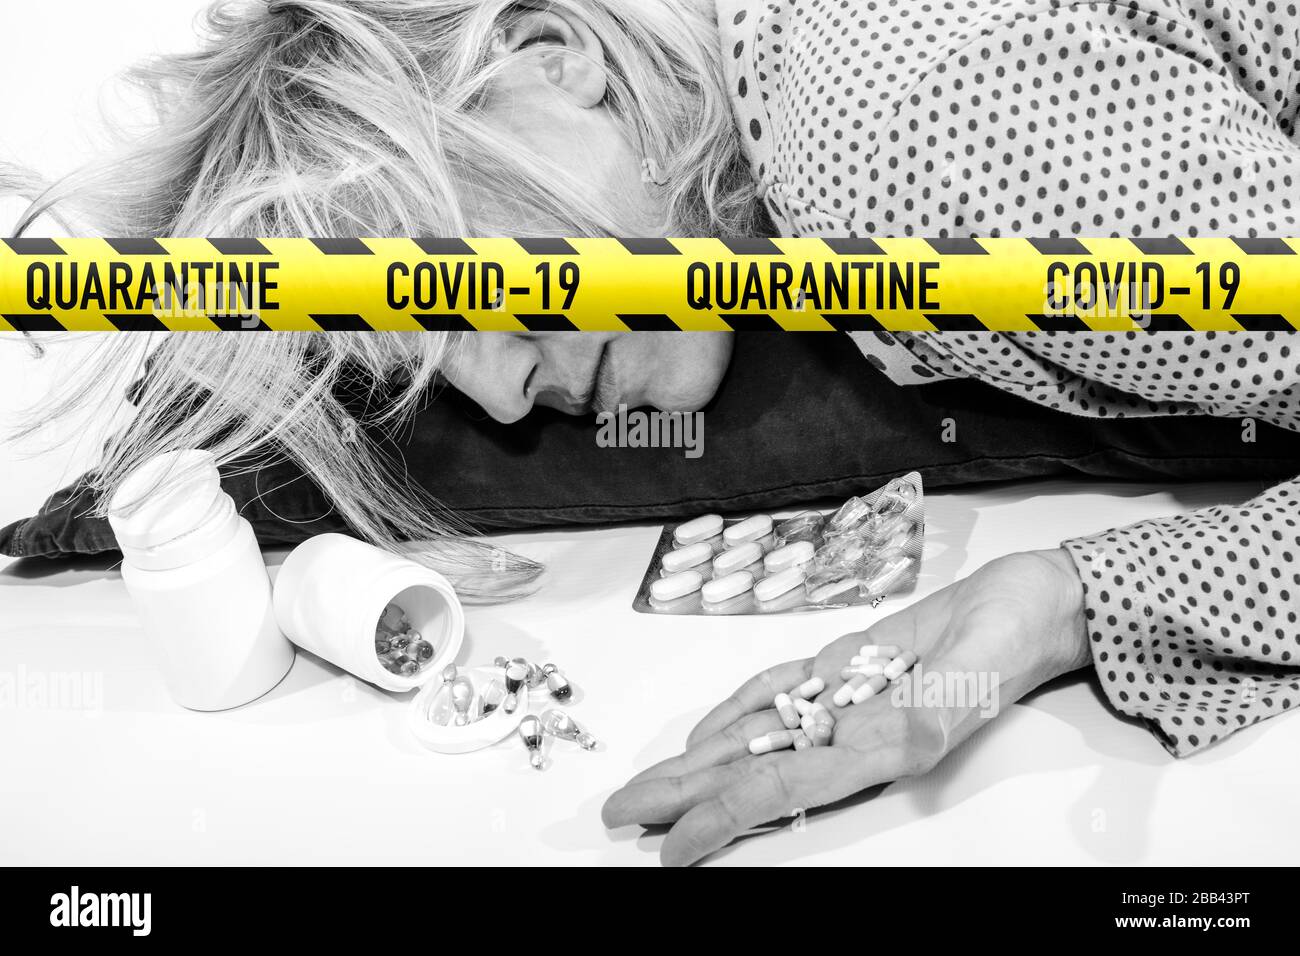 Depression for Covid-19. Collapsing woman after abuse of drugs. Concept of: droge addiction, stress, pain, isolation. Coronavirus quarantine increases Stock Photo